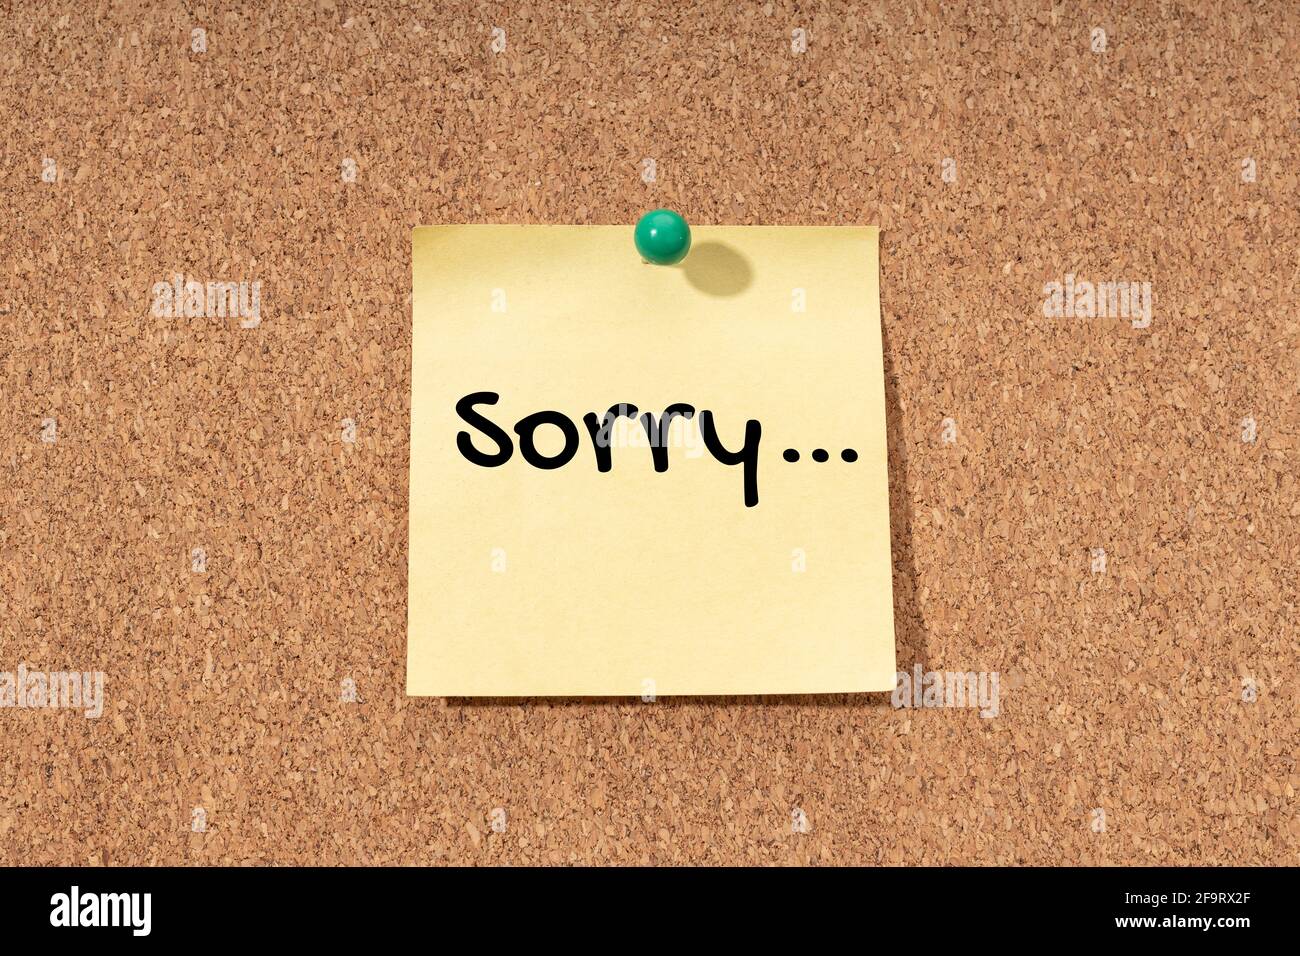 Sorry word on yellow note on cork board Stock Photo